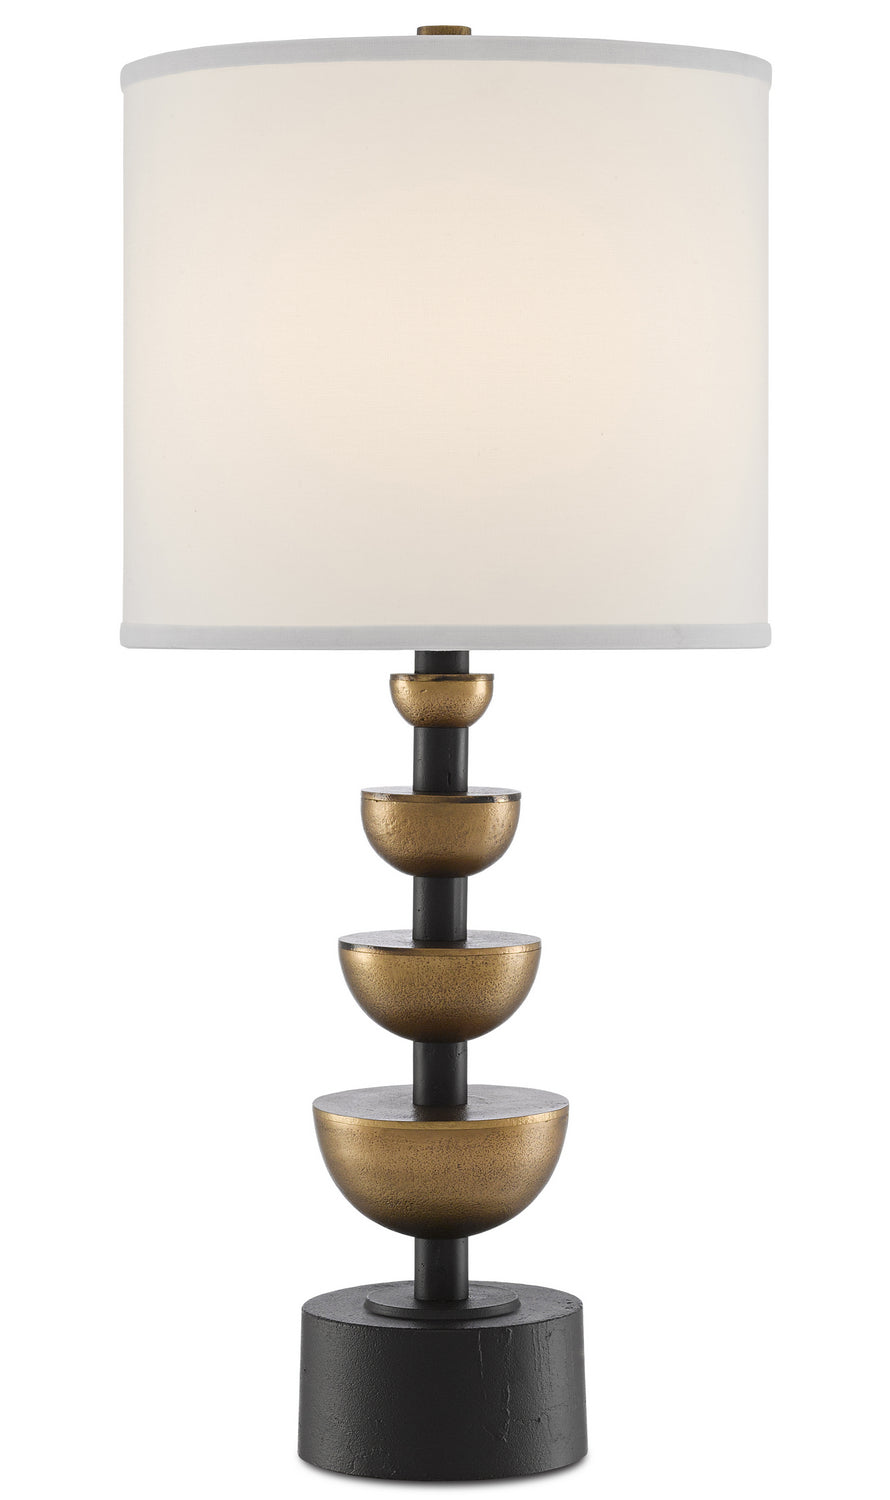 One Light Table Lamp from the Chastain collection in Antique Brass/Black finish